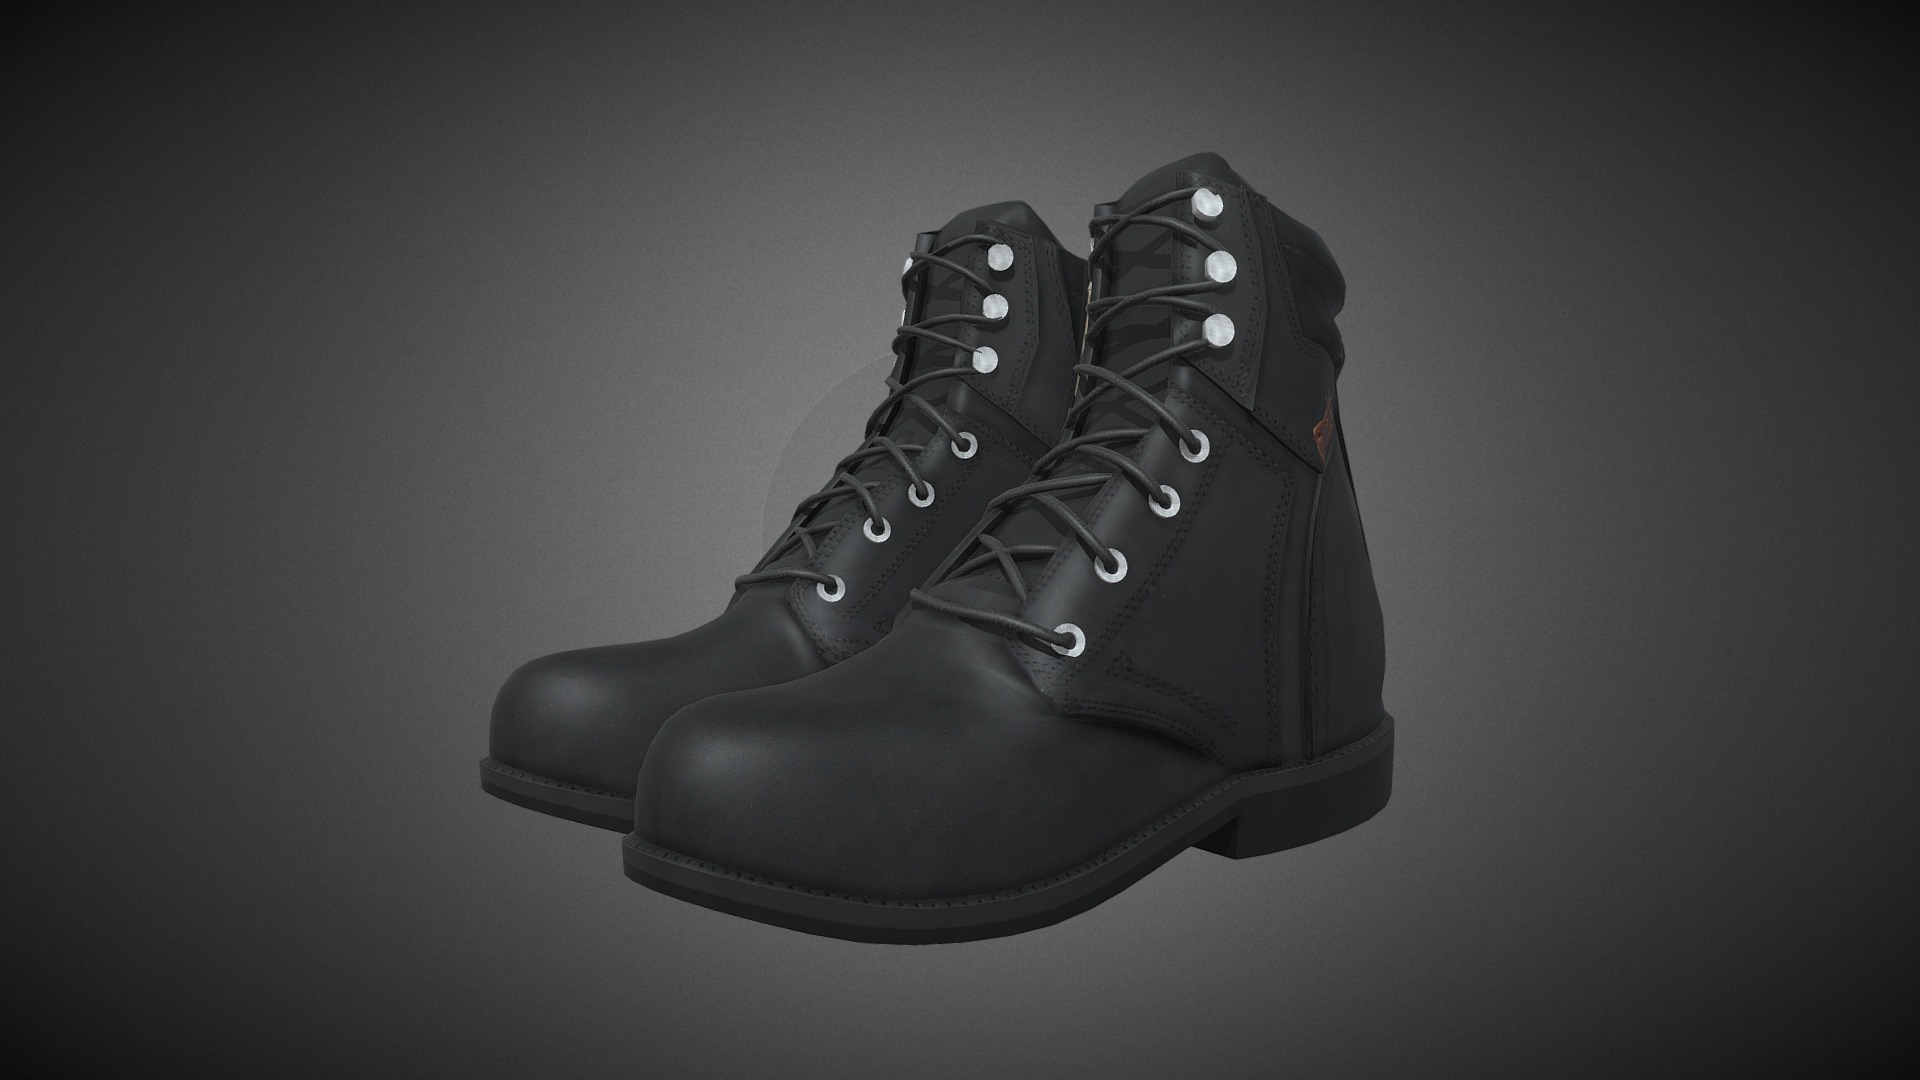 3D model Boot Harley Davidson - This is a 3D model of the Boot Harley Davidson. The 3D model is about a black and white shoe.